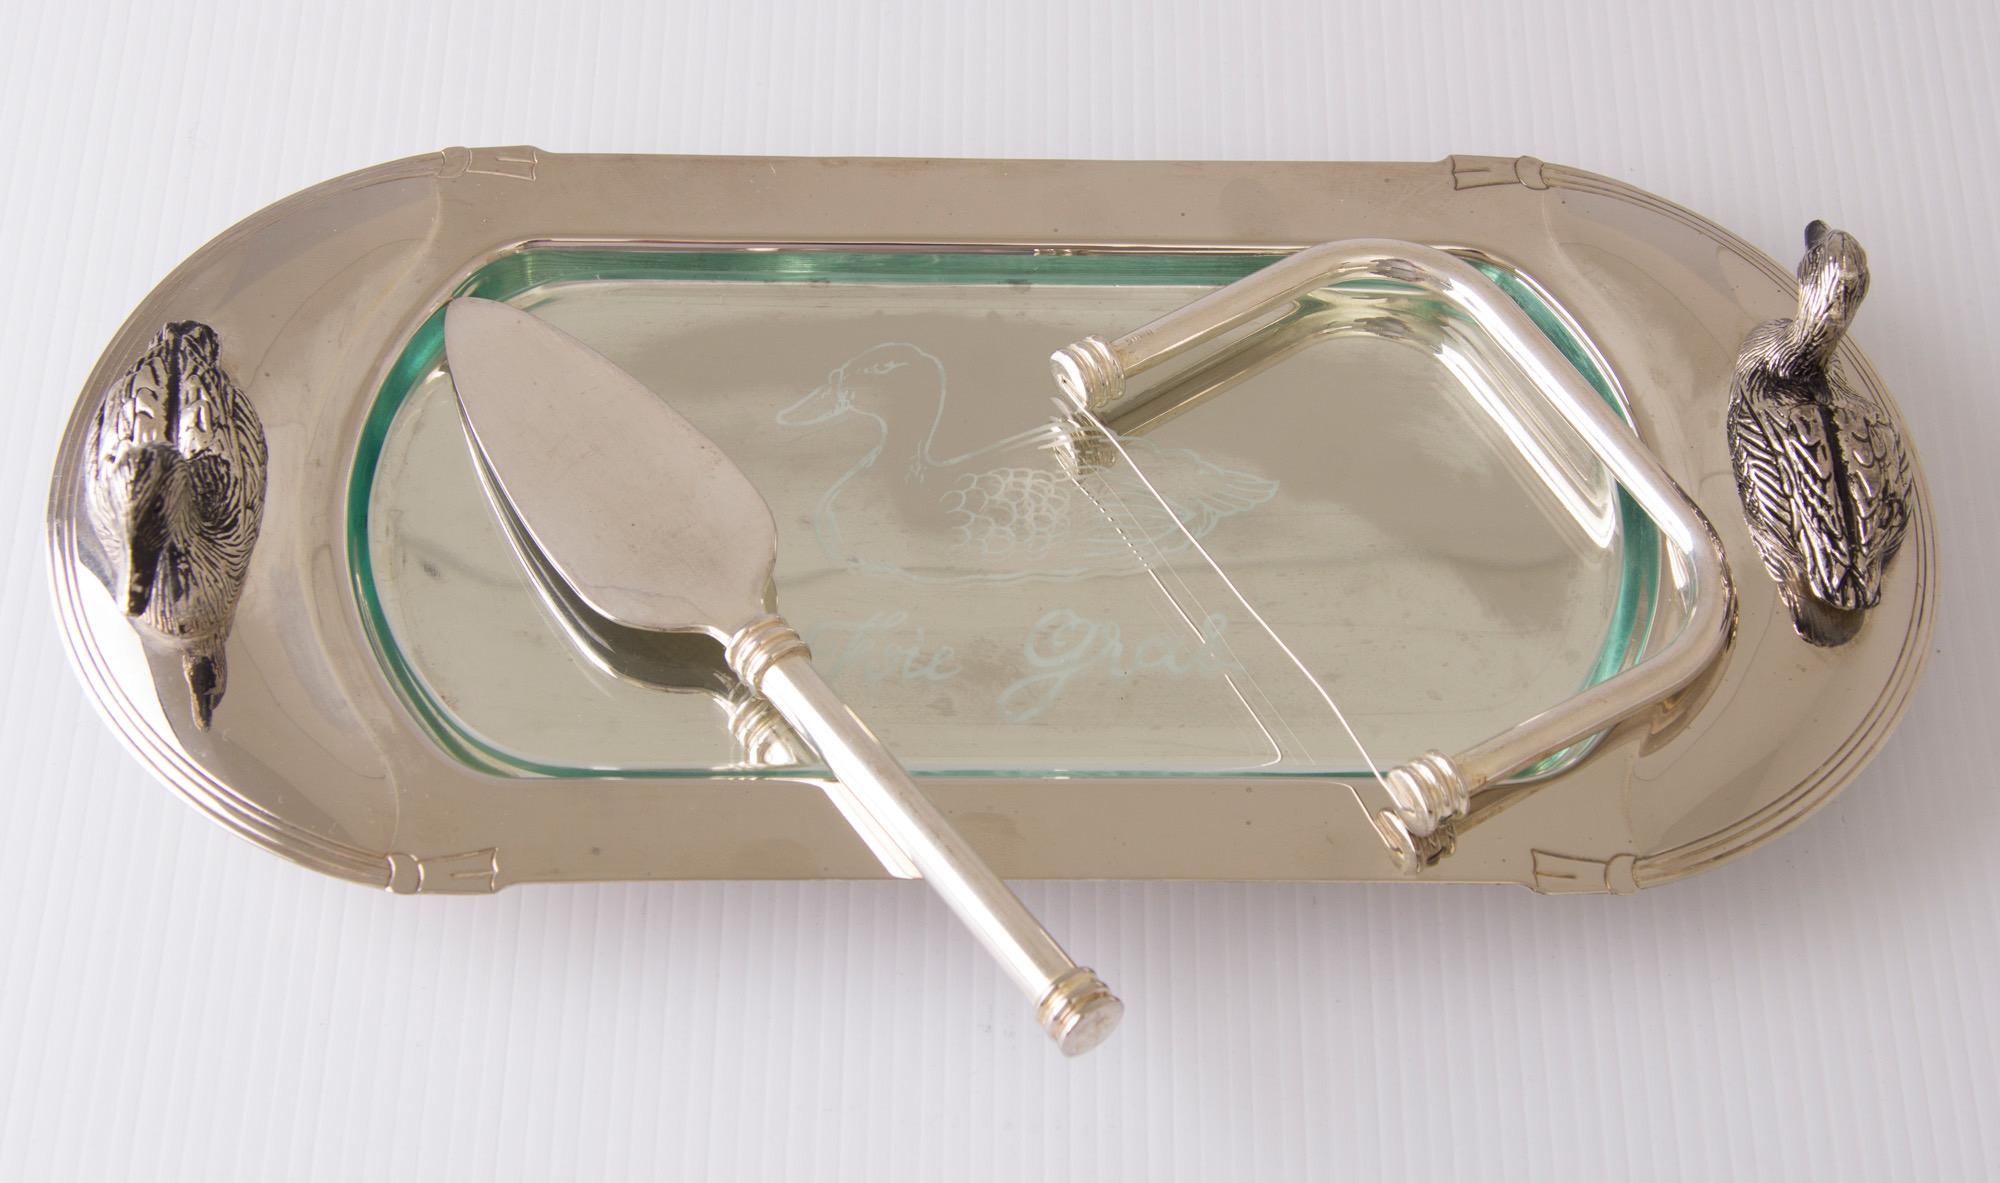 Art Deco swan design silver plate foie grass dish with glass liner, cutter and server.
Measures: H 7 cm, W 31 cm, D 15 cm.
French, circa 1930.